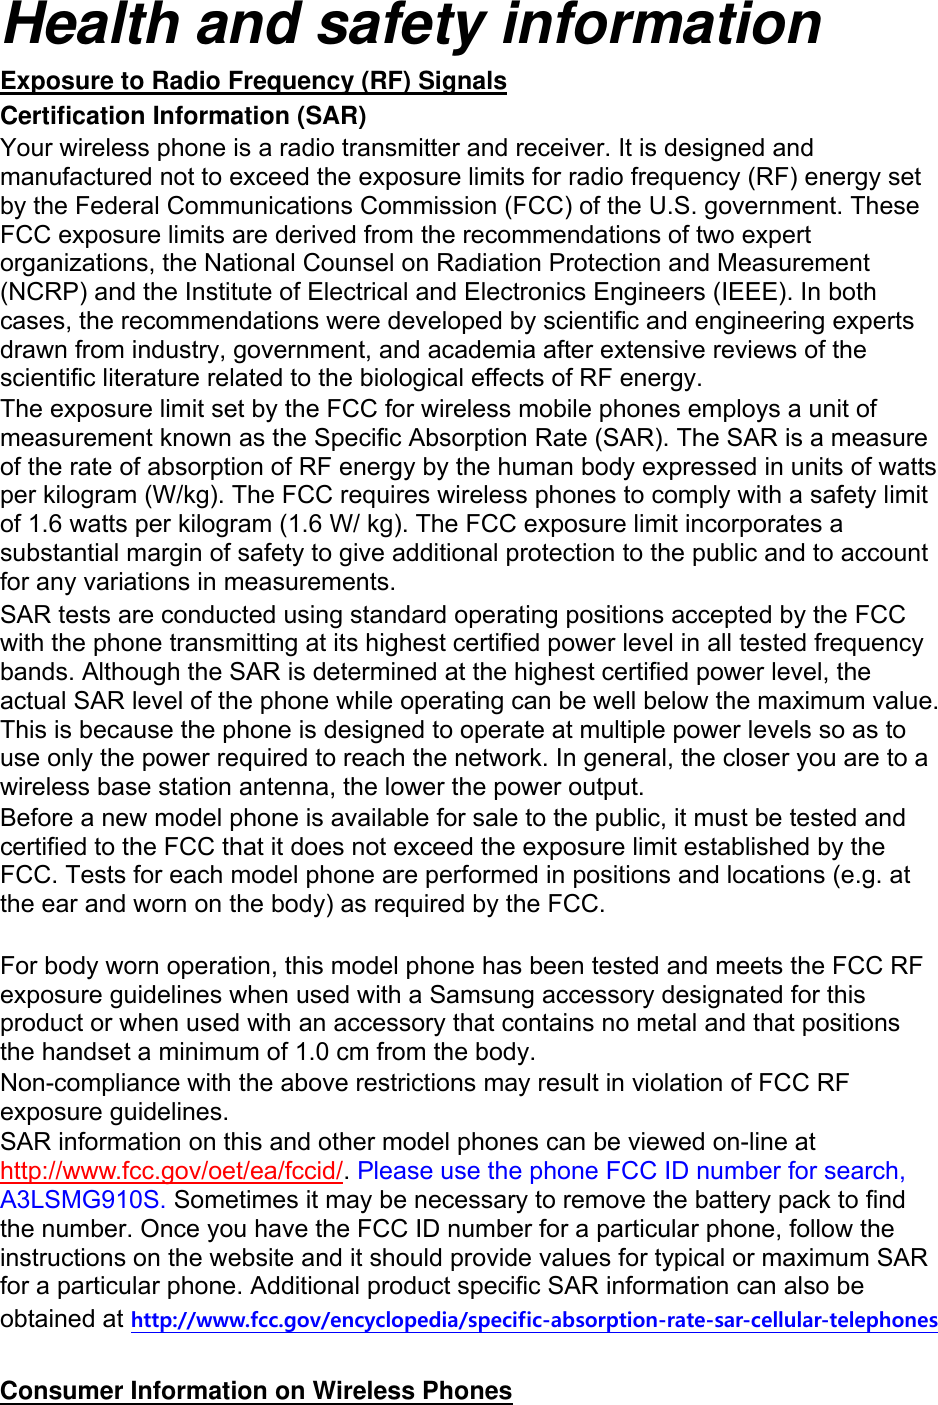 Health and safety information Exposure to Radio Frequency (RF) Signals Certification Information (SAR) Your wireless phone is a radio transmitter and receiver. It is designed and manufactured not to exceed the exposure limits for radio frequency (RF) energy set by the Federal Communications Commission (FCC) of the U.S. government. These FCC exposure limits are derived from the recommendations of two expert organizations, the National Counsel on Radiation Protection and Measurement (NCRP) and the Institute of Electrical and Electronics Engineers (IEEE). In both cases, the recommendations were developed by scientific and engineering experts drawn from industry, government, and academia after extensive reviews of the scientific literature related to the biological effects of RF energy. The exposure limit set by the FCC for wireless mobile phones employs a unit of measurement known as the Specific Absorption Rate (SAR). The SAR is a measure of the rate of absorption of RF energy by the human body expressed in units of watts per kilogram (W/kg). The FCC requires wireless phones to comply with a safety limit of 1.6 watts per kilogram (1.6 W/ kg). The FCC exposure limit incorporates a substantial margin of safety to give additional protection to the public and to account for any variations in measurements. SAR tests are conducted using standard operating positions accepted by the FCC with the phone transmitting at its highest certified power level in all tested frequency bands. Although the SAR is determined at the highest certified power level, the actual SAR level of the phone while operating can be well below the maximum value. This is because the phone is designed to operate at multiple power levels so as to use only the power required to reach the network. In general, the closer you are to a wireless base station antenna, the lower the power output. Before a new model phone is available for sale to the public, it must be tested and certified to the FCC that it does not exceed the exposure limit established by the FCC. Tests for each model phone are performed in positions and locations (e.g. at the ear and worn on the body) as required by the FCC.      For body worn operation, this model phone has been tested and meets the FCC RF exposure guidelines when used with a Samsung accessory designated for this product or when used with an accessory that contains no metal and that positions the handset a minimum of 1.0 cm from the body.   Non-compliance with the above restrictions may result in violation of FCC RF exposure guidelines. SAR information on this and other model phones can be viewed on-line at http://www.fcc.gov/oet/ea/fccid/. Please use the phone FCC ID number for search, A3LSMG910S. Sometimes it may be necessary to remove the battery pack to find the number. Once you have the FCC ID number for a particular phone, follow the instructions on the website and it should provide values for typical or maximum SAR for a particular phone. Additional product specific SAR information can also be obtained at http://www.fcc.gov/encyclopedia/specific-absorption-rate-sar-cellular-telephones  Consumer Information on Wireless Phones 